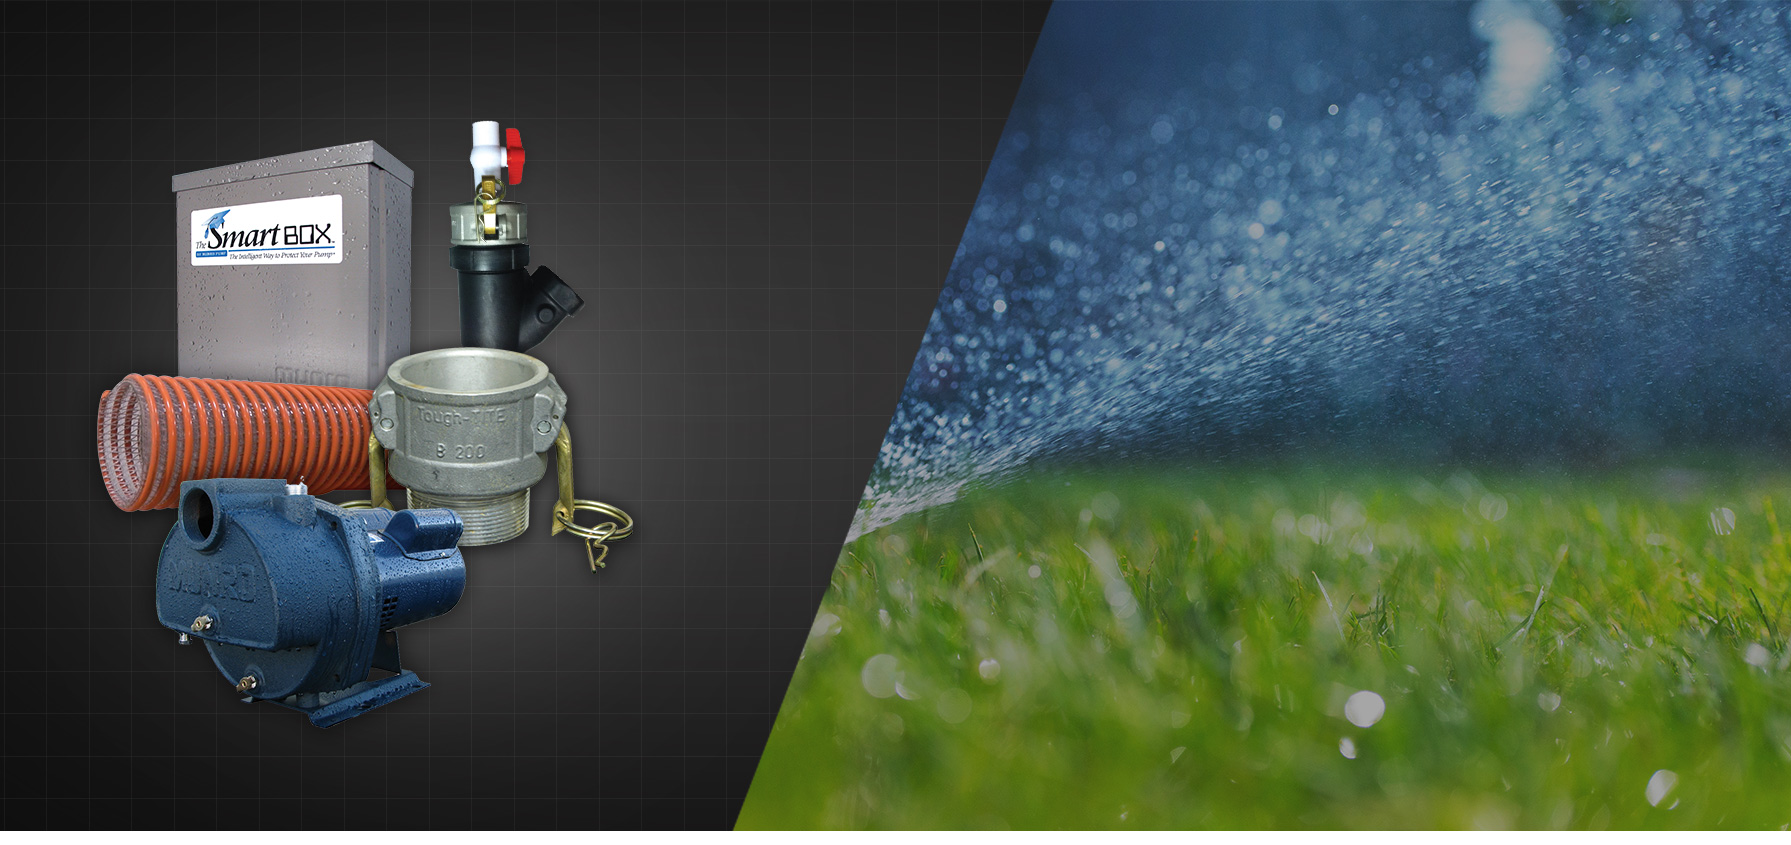  We have you covered   IRRIGATION    Learn More  